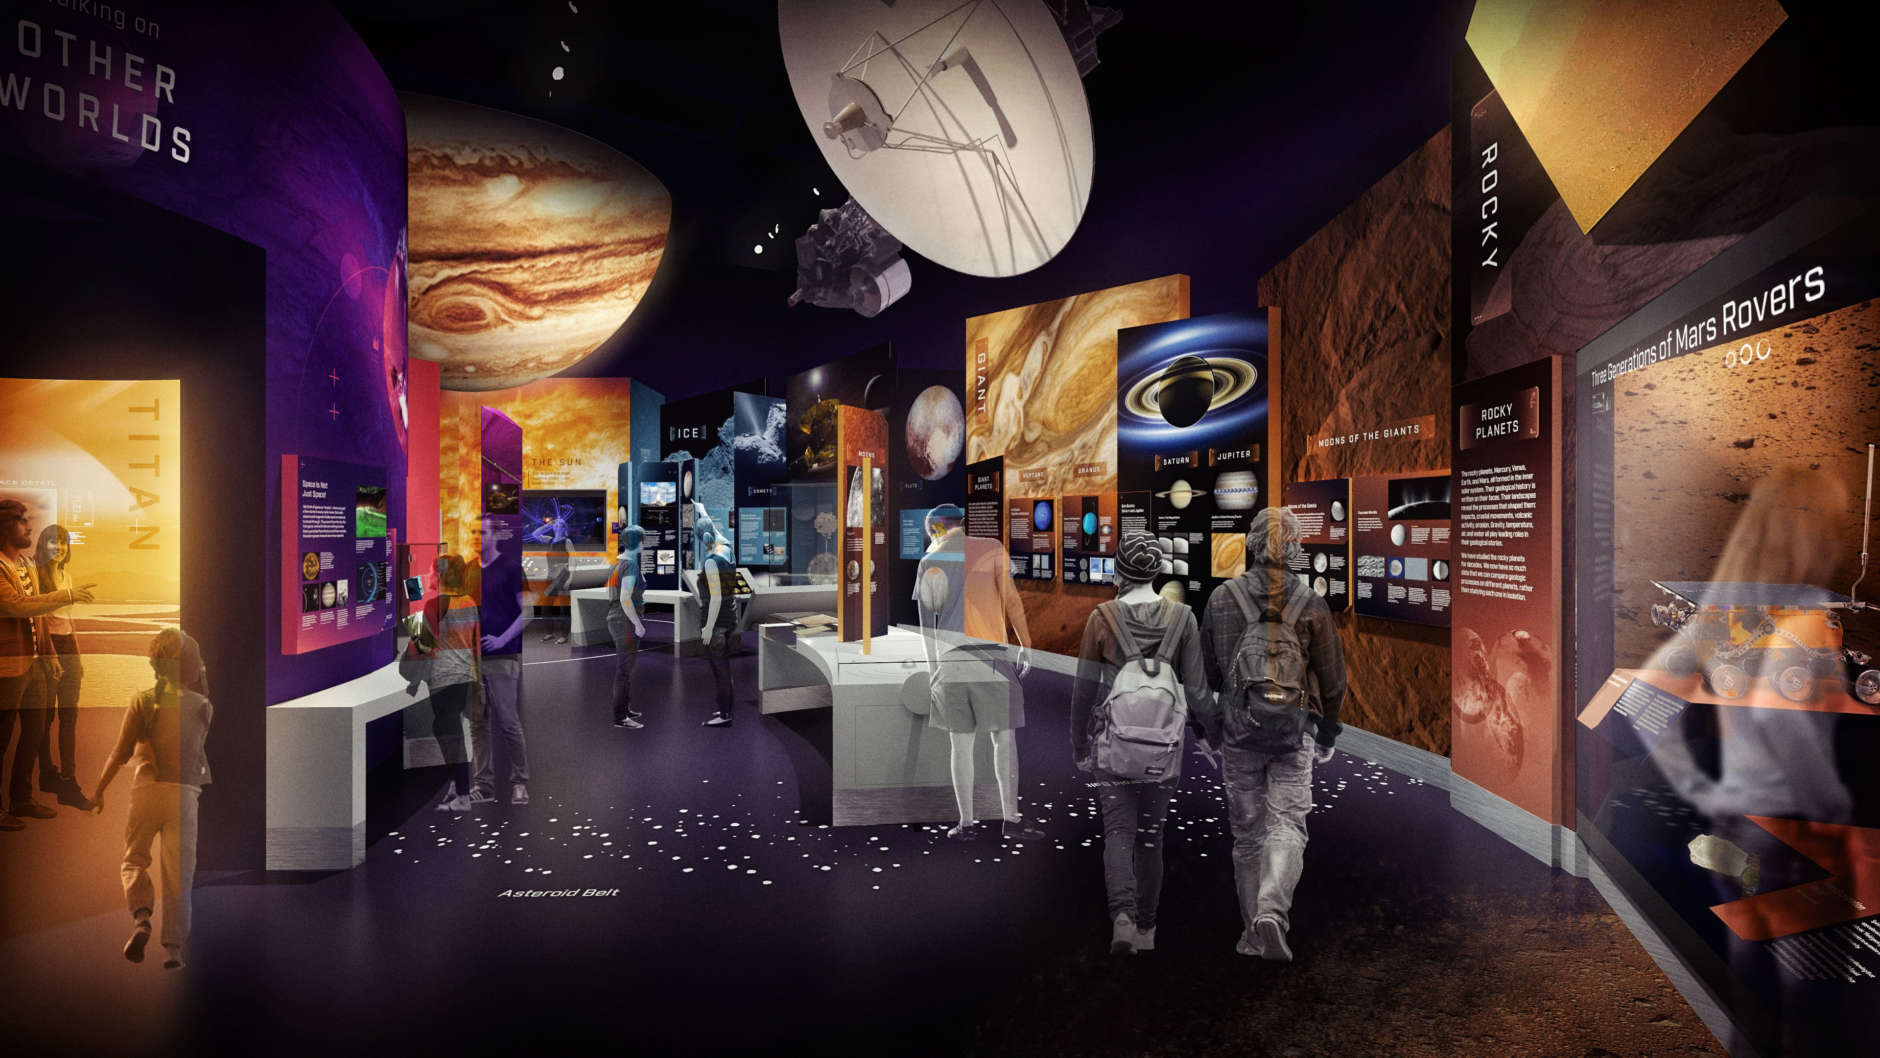 "Exploring the Planets" is part of the Smithsonian's "Reimagining" of the Air and Space Museum. (Copyright: Smithsonian Institution)